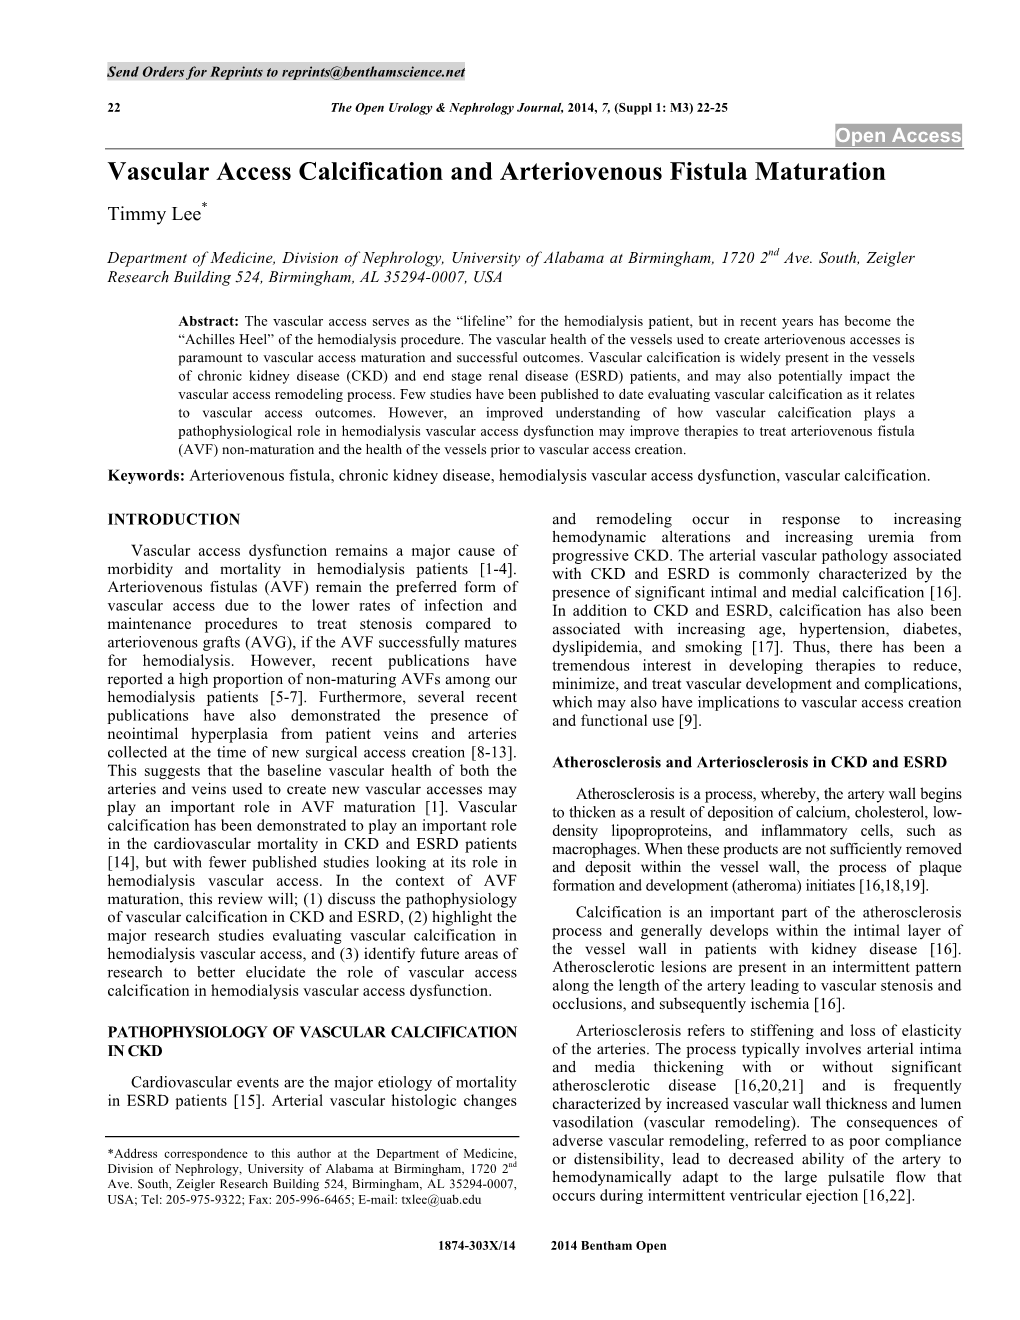 Vascular Access Calcification and Arteriovenous Fistula Maturation Timmy Lee*